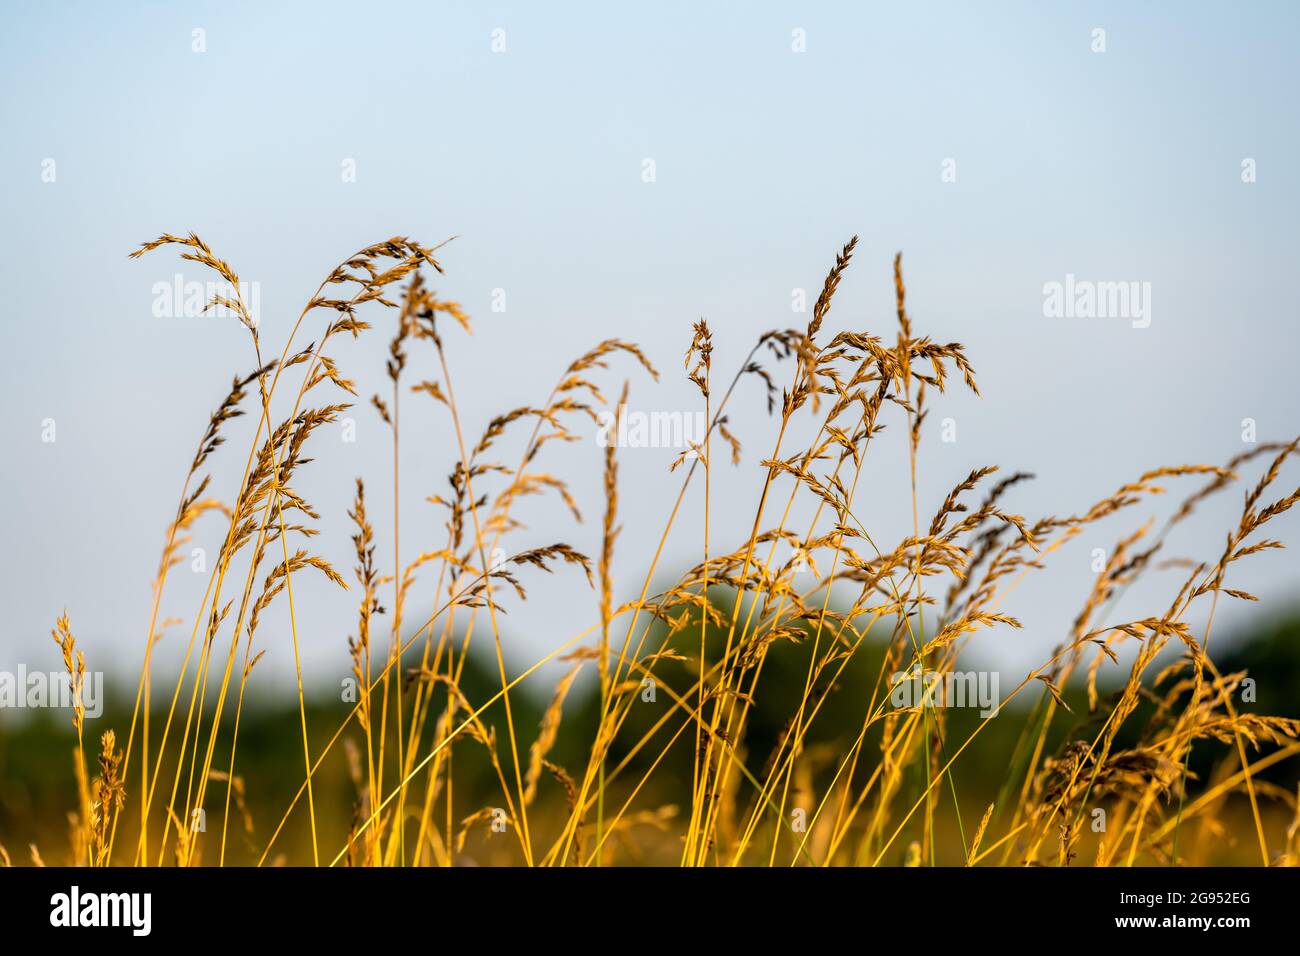 Wild meadow grasses due to rewilding of common land in Essex Stock Photo